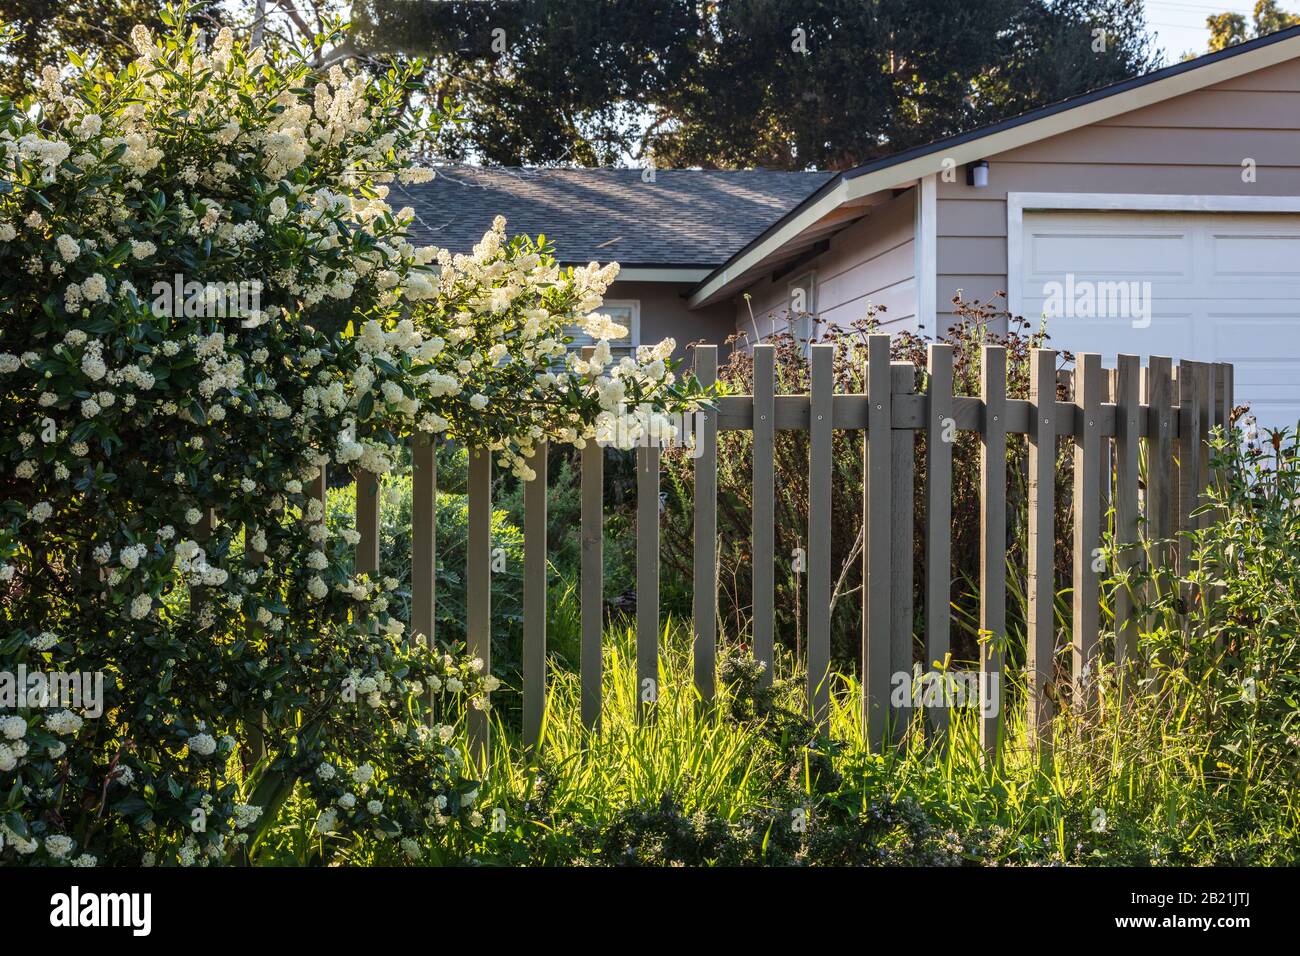 Home landscaping with wood fence and overgrown plants. Taken from a public space in February 2020. Stock Photo